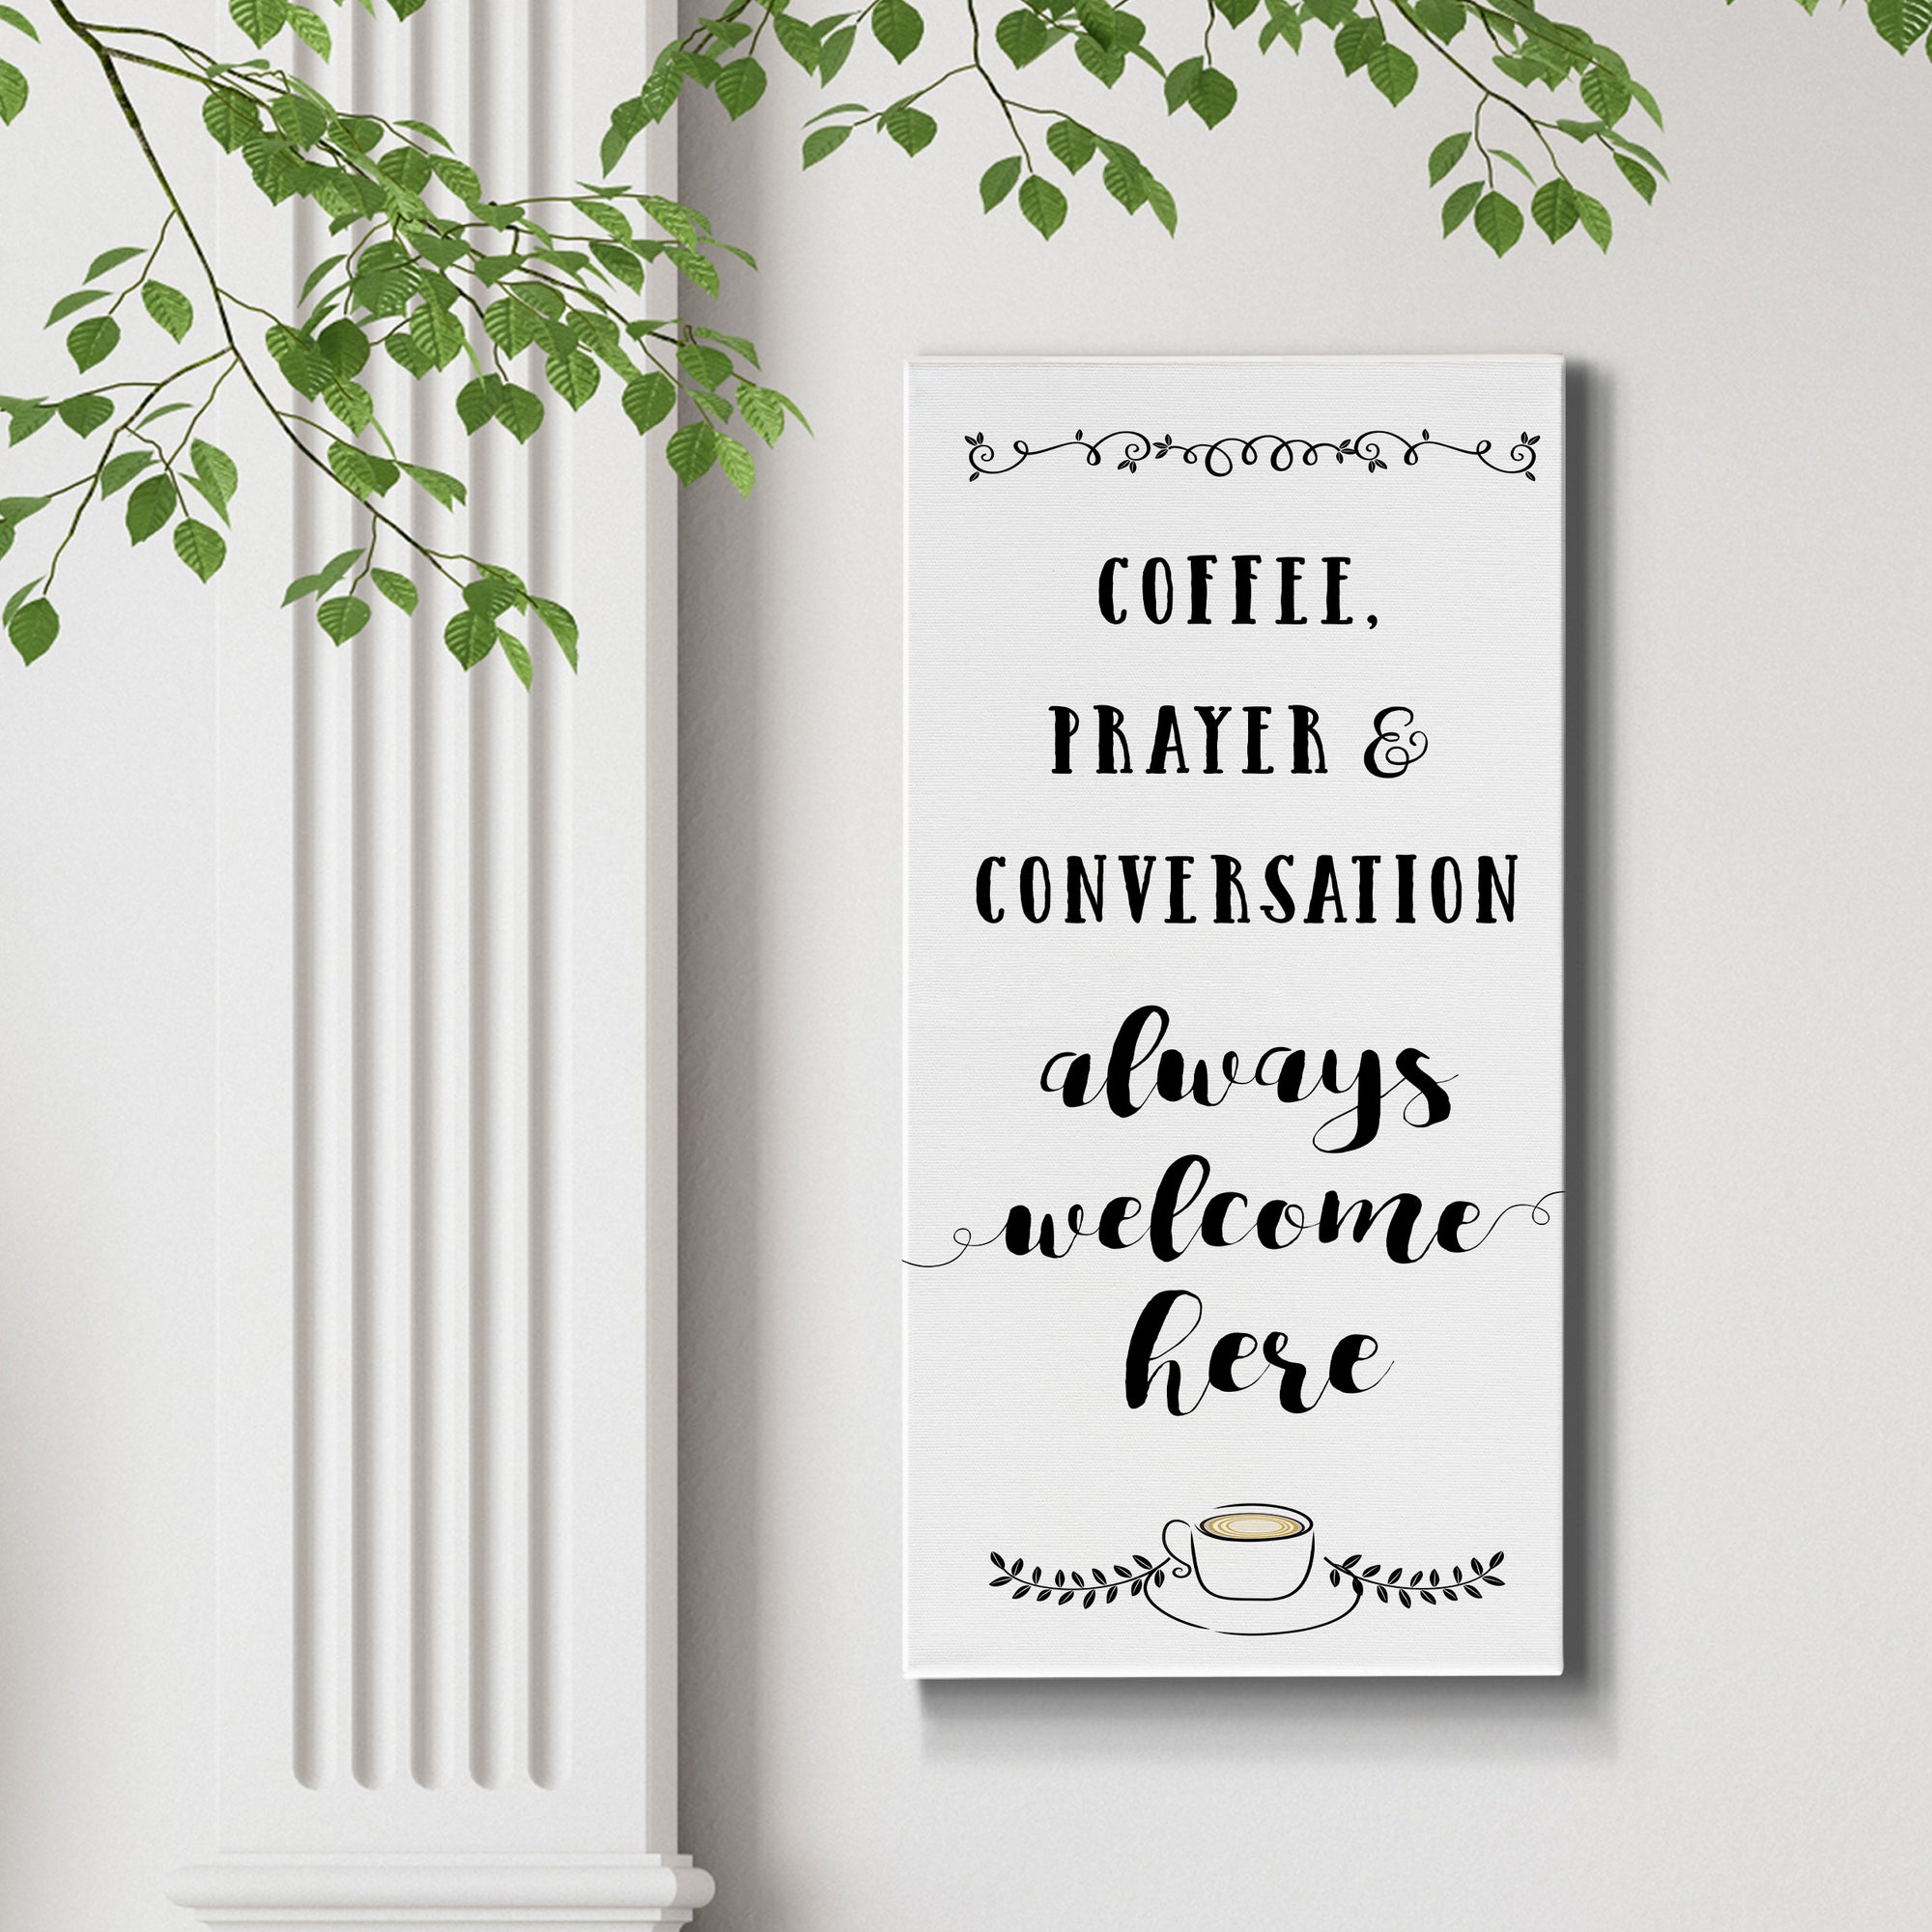 Always Welcome - Premium Gallery Wrapped Canvas - Ready to Hang